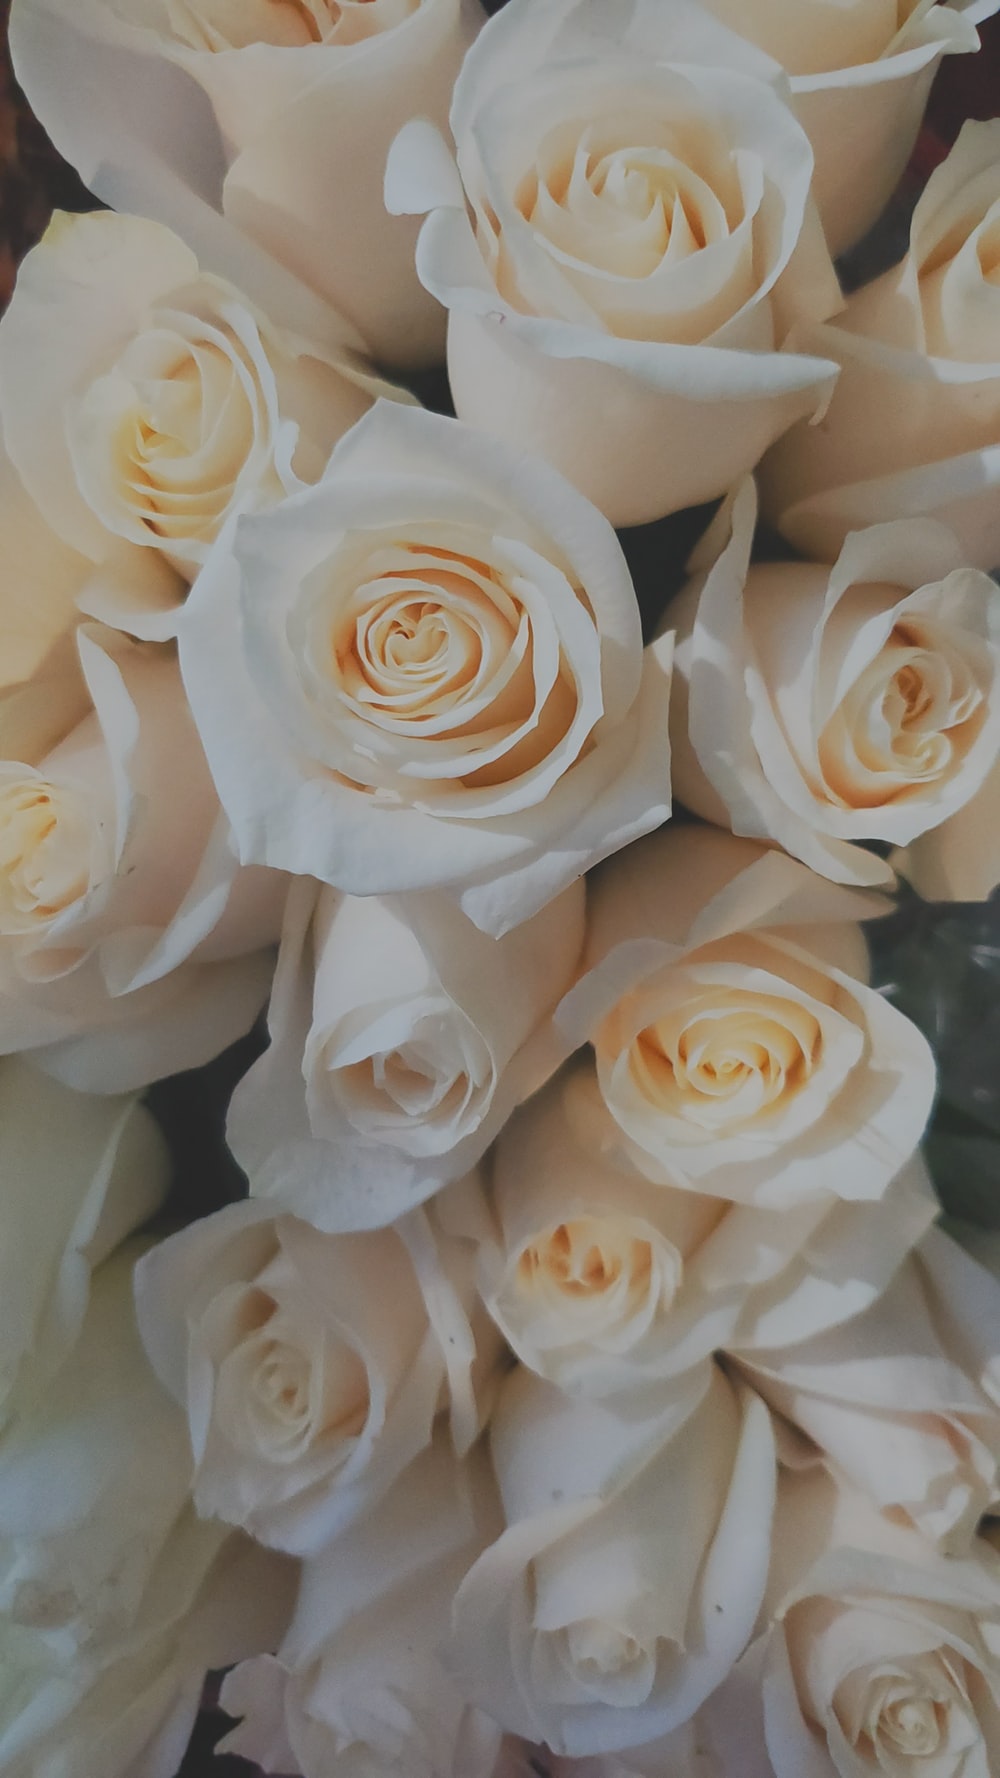 Picture Of White Roses - KibrisPDR